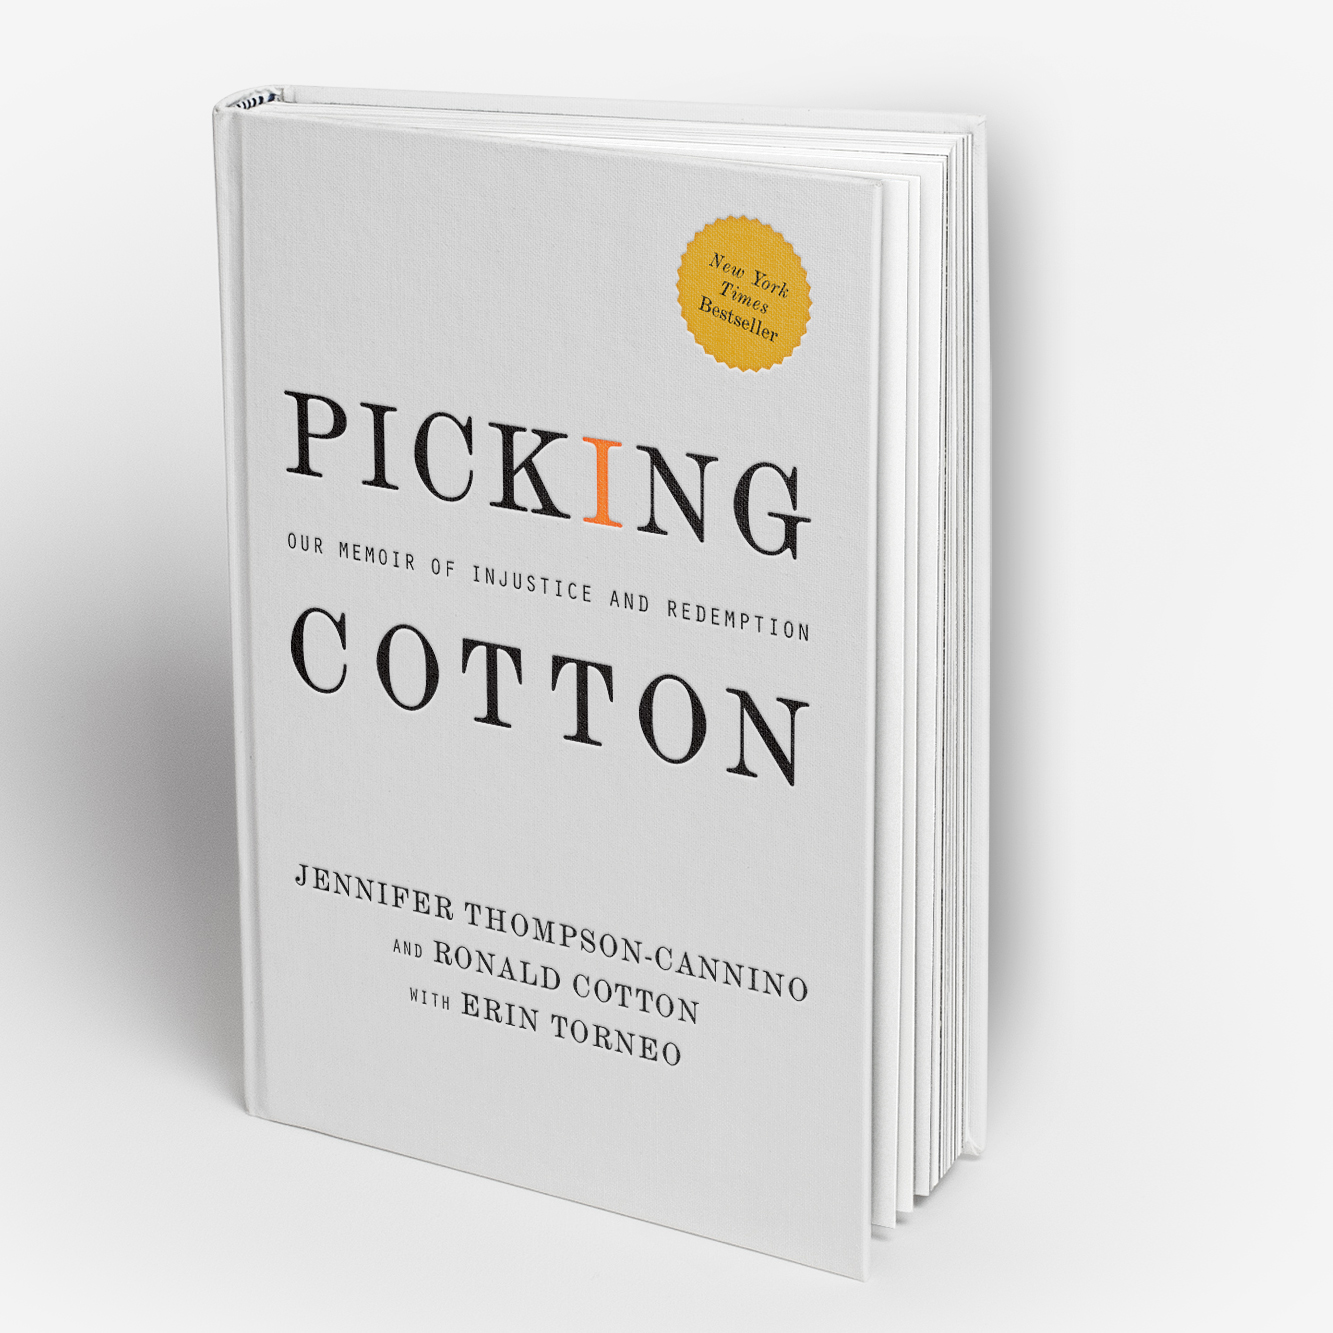 About the Authors — Picking Cotton